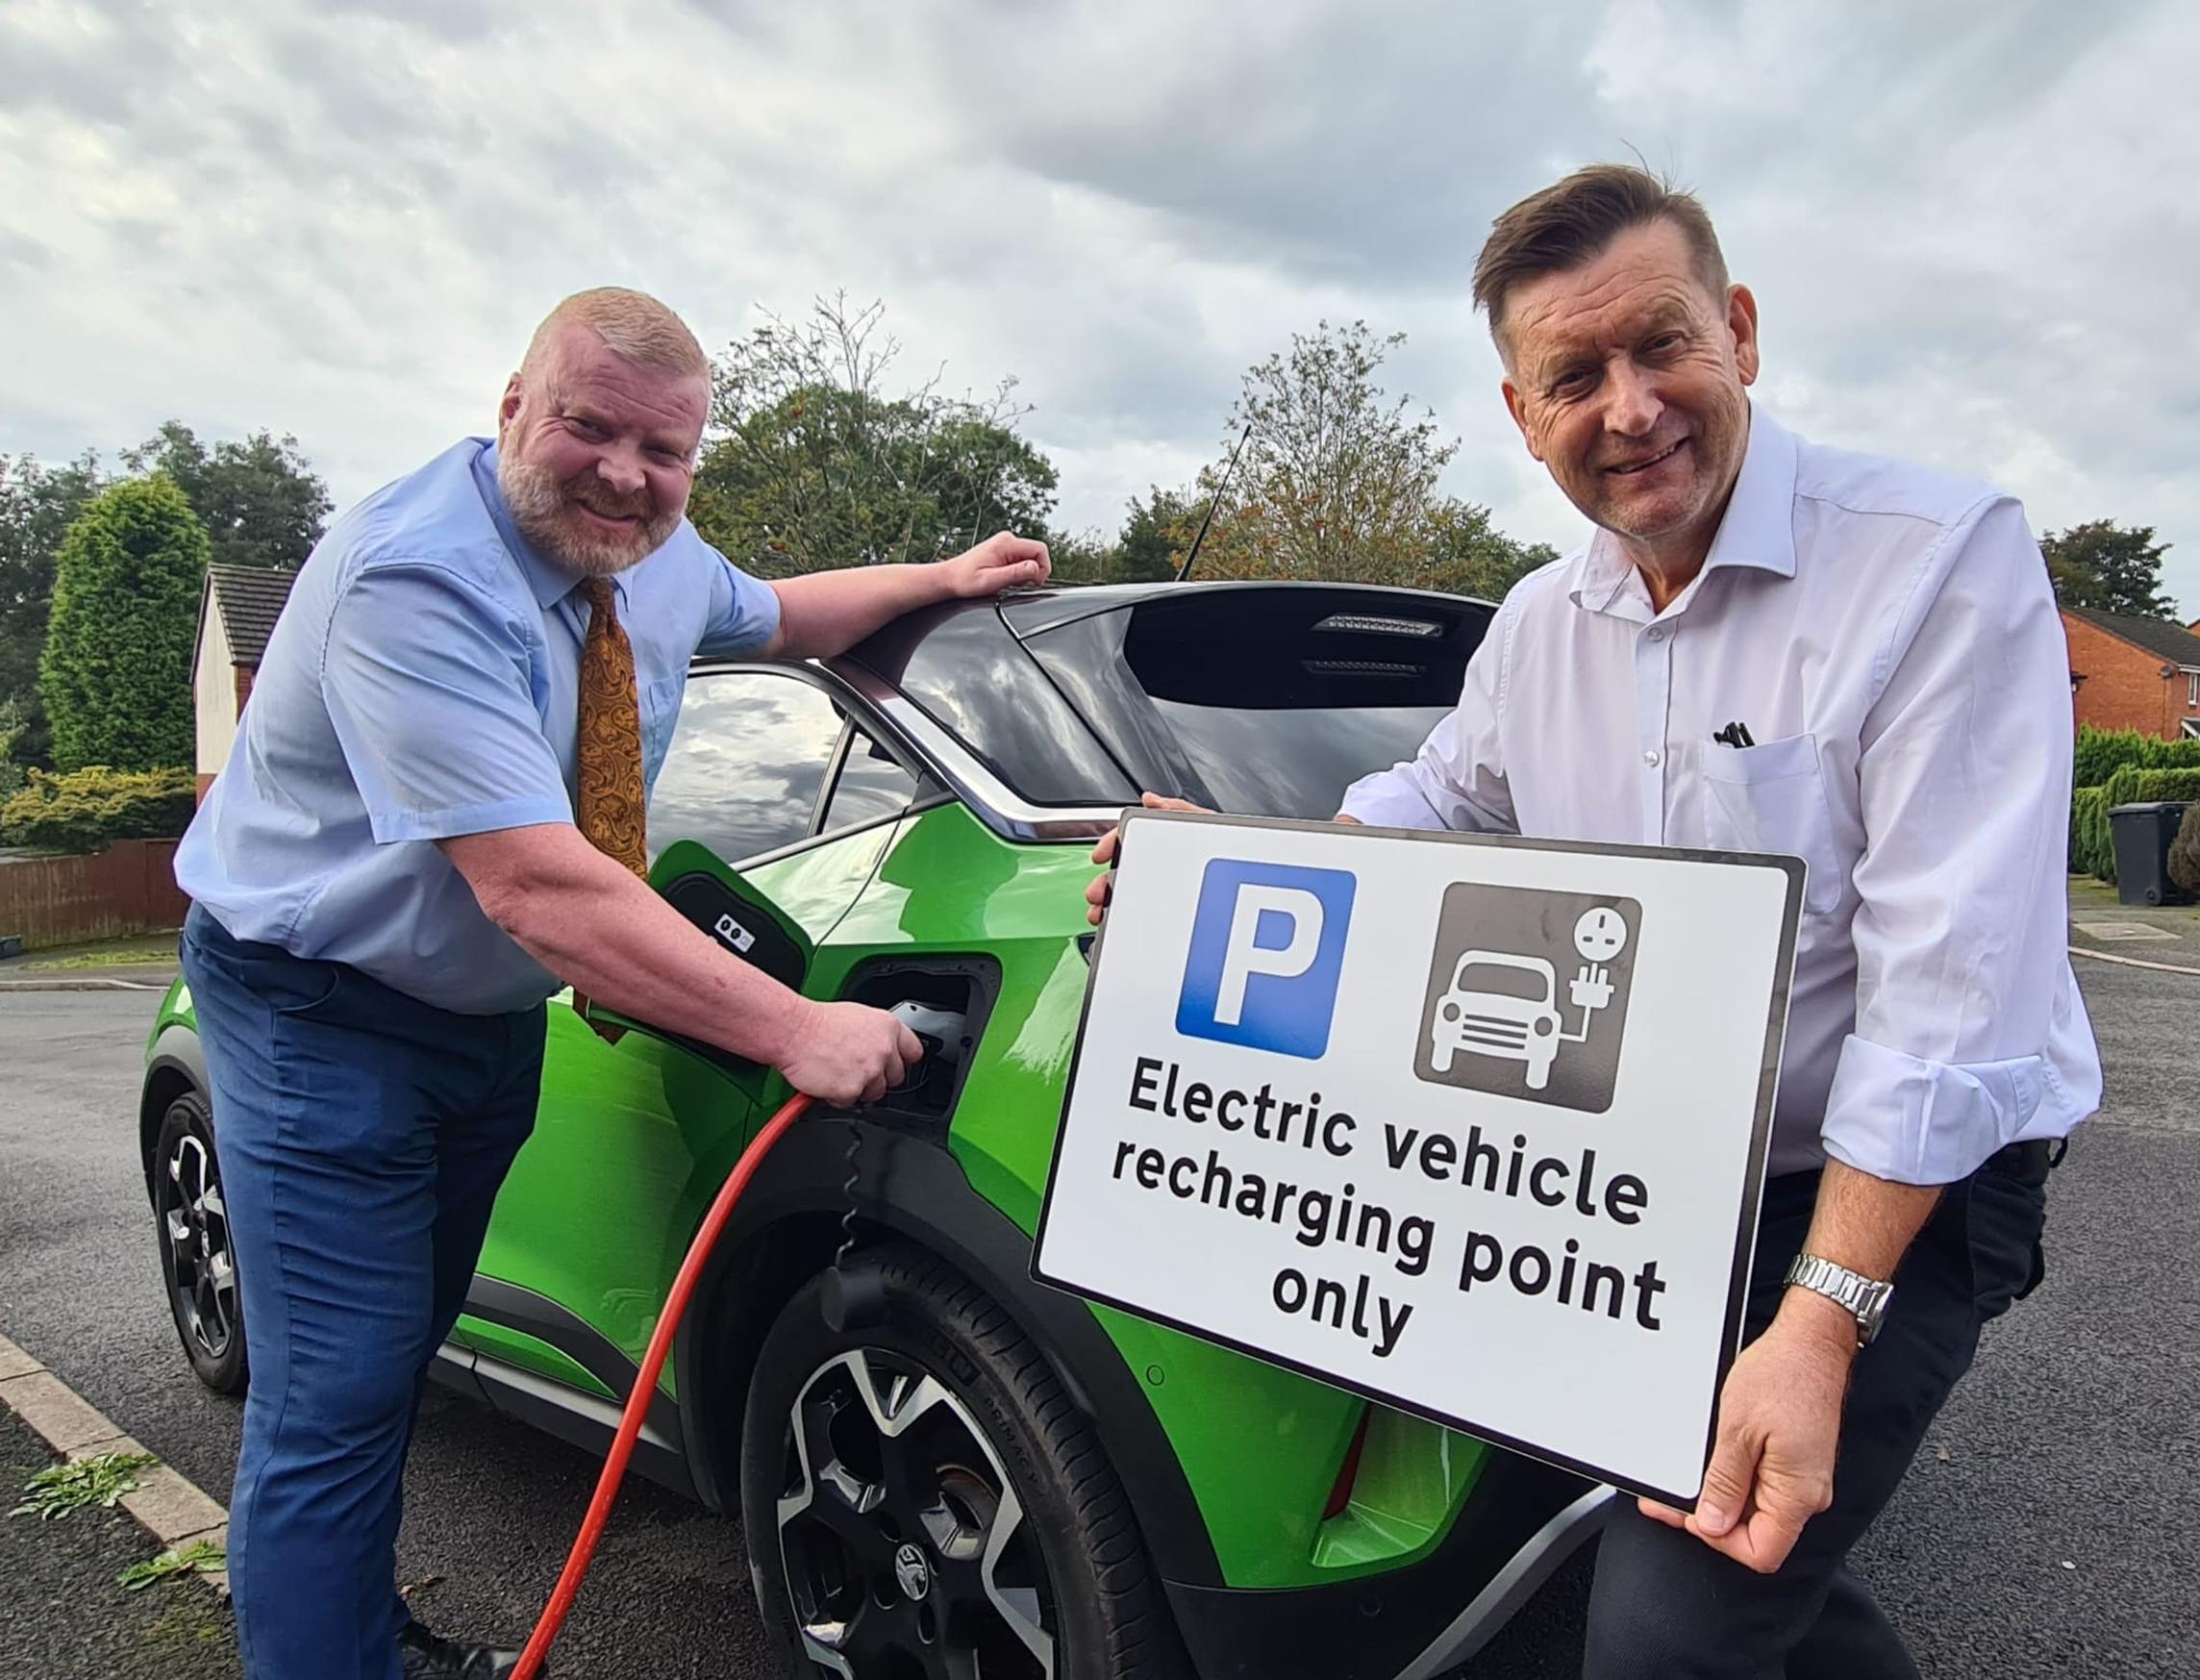 Cllr Damian Corfield and Cllr Dr Rob Clinton promoting EV charging